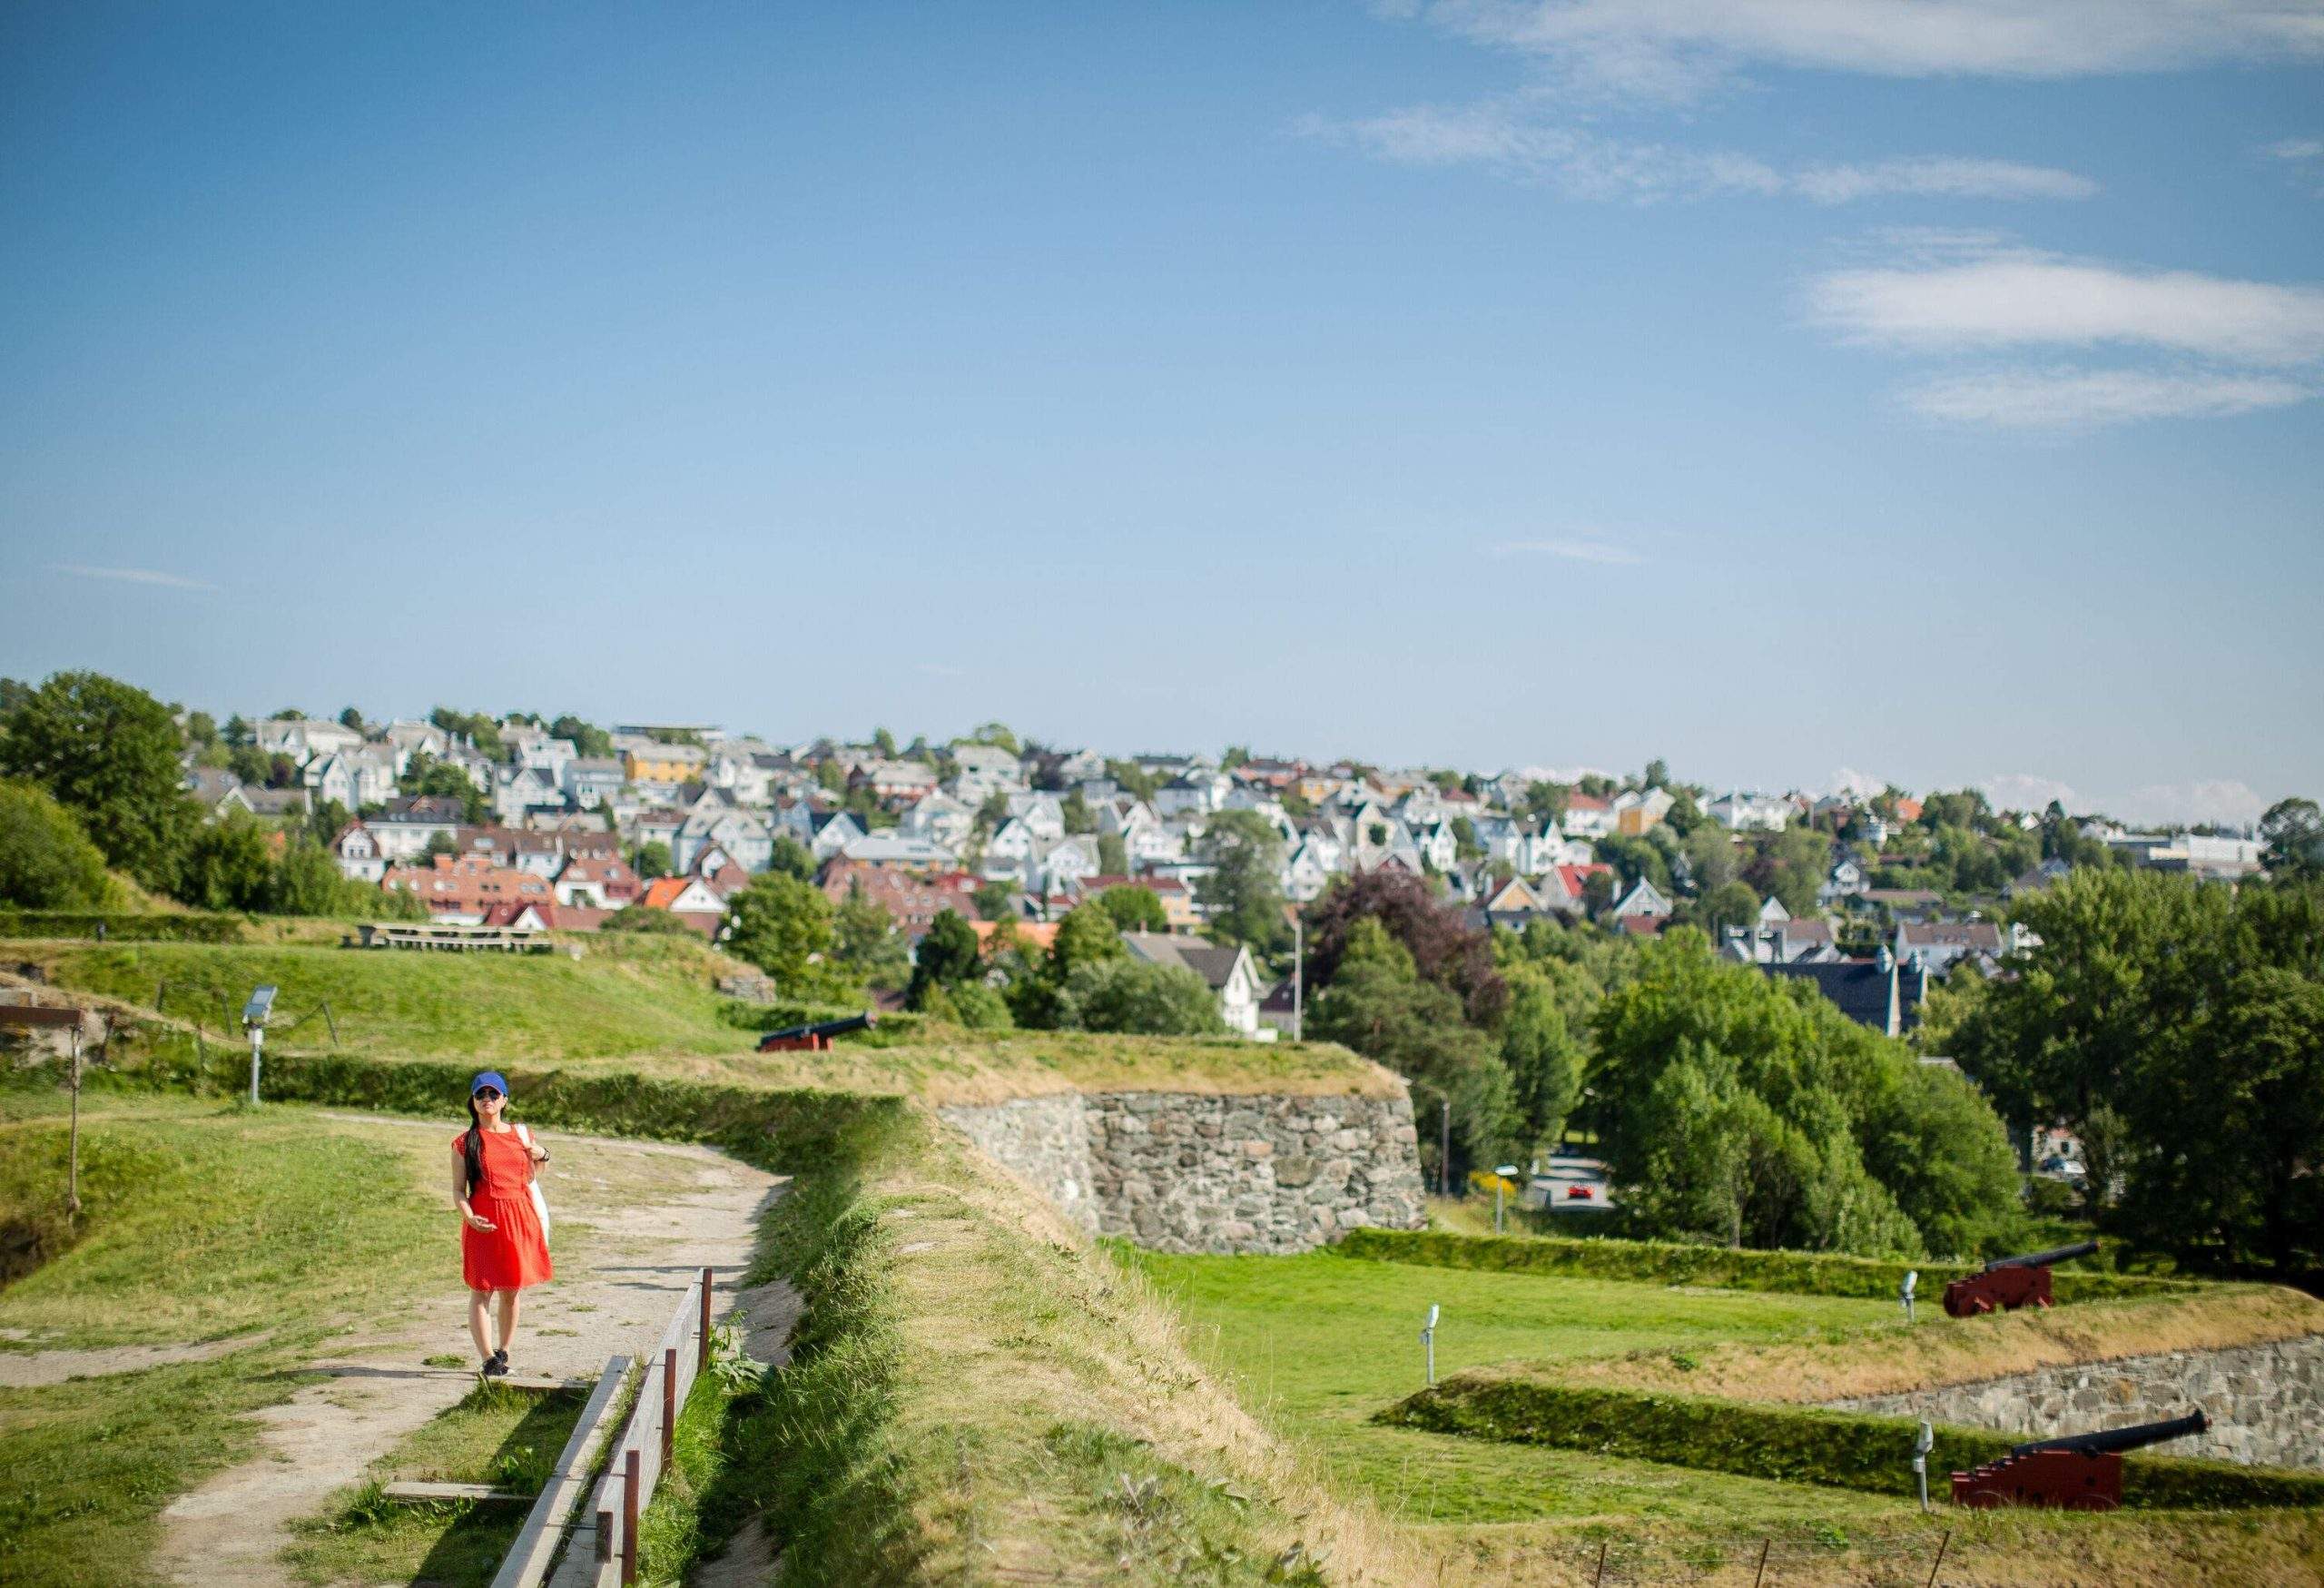 A woman in a red dress stands on the top of a fortress overlooking a cluster of buildings in the distance.